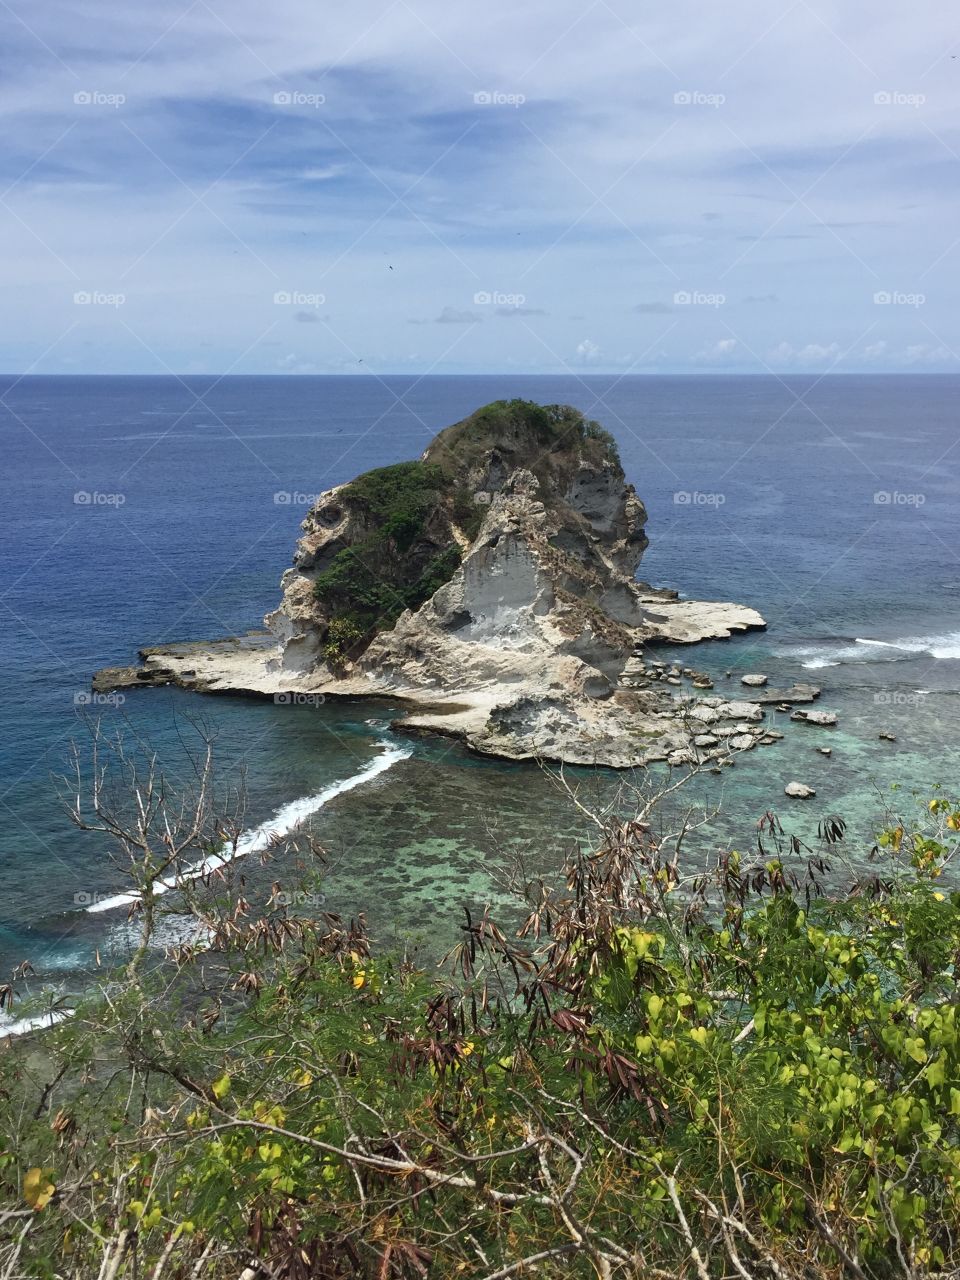 The view of Bird Island from the Bird Island lookout point on Saipan, CNMI.